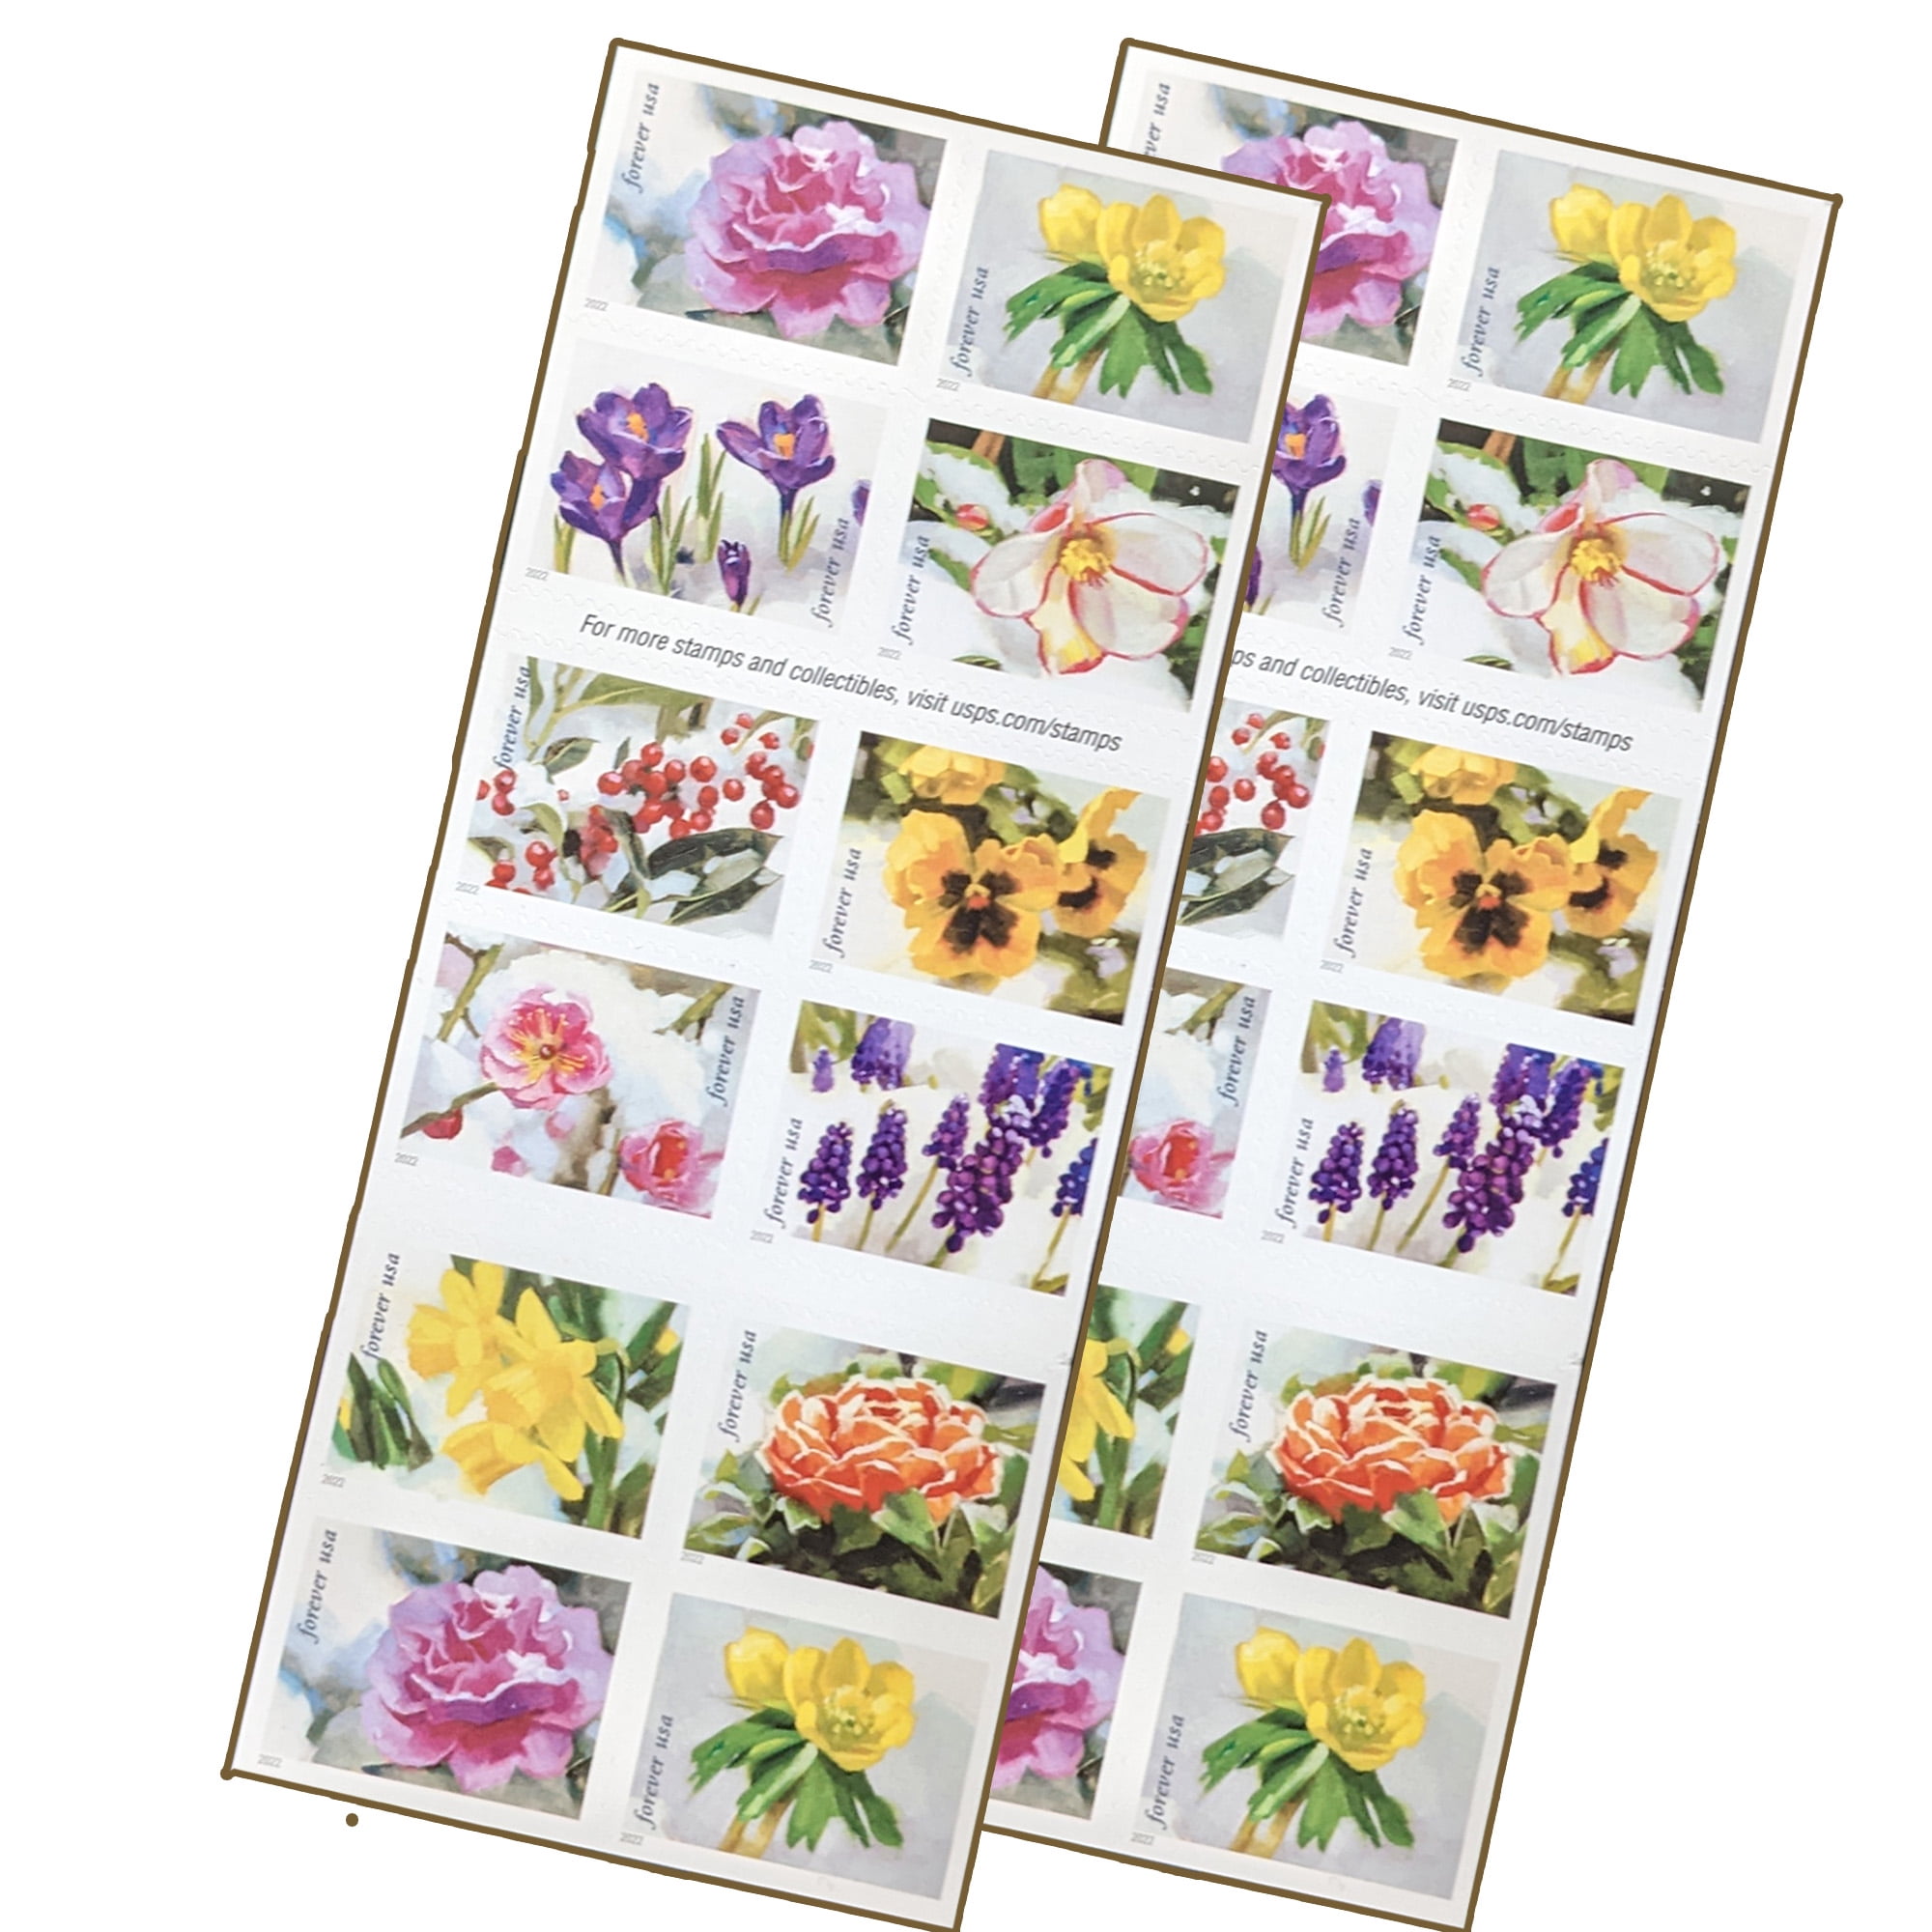 10 Winter Forest Forever Stamps Holiday Woods in Snow Postage Stamps f –  Edelweiss Post